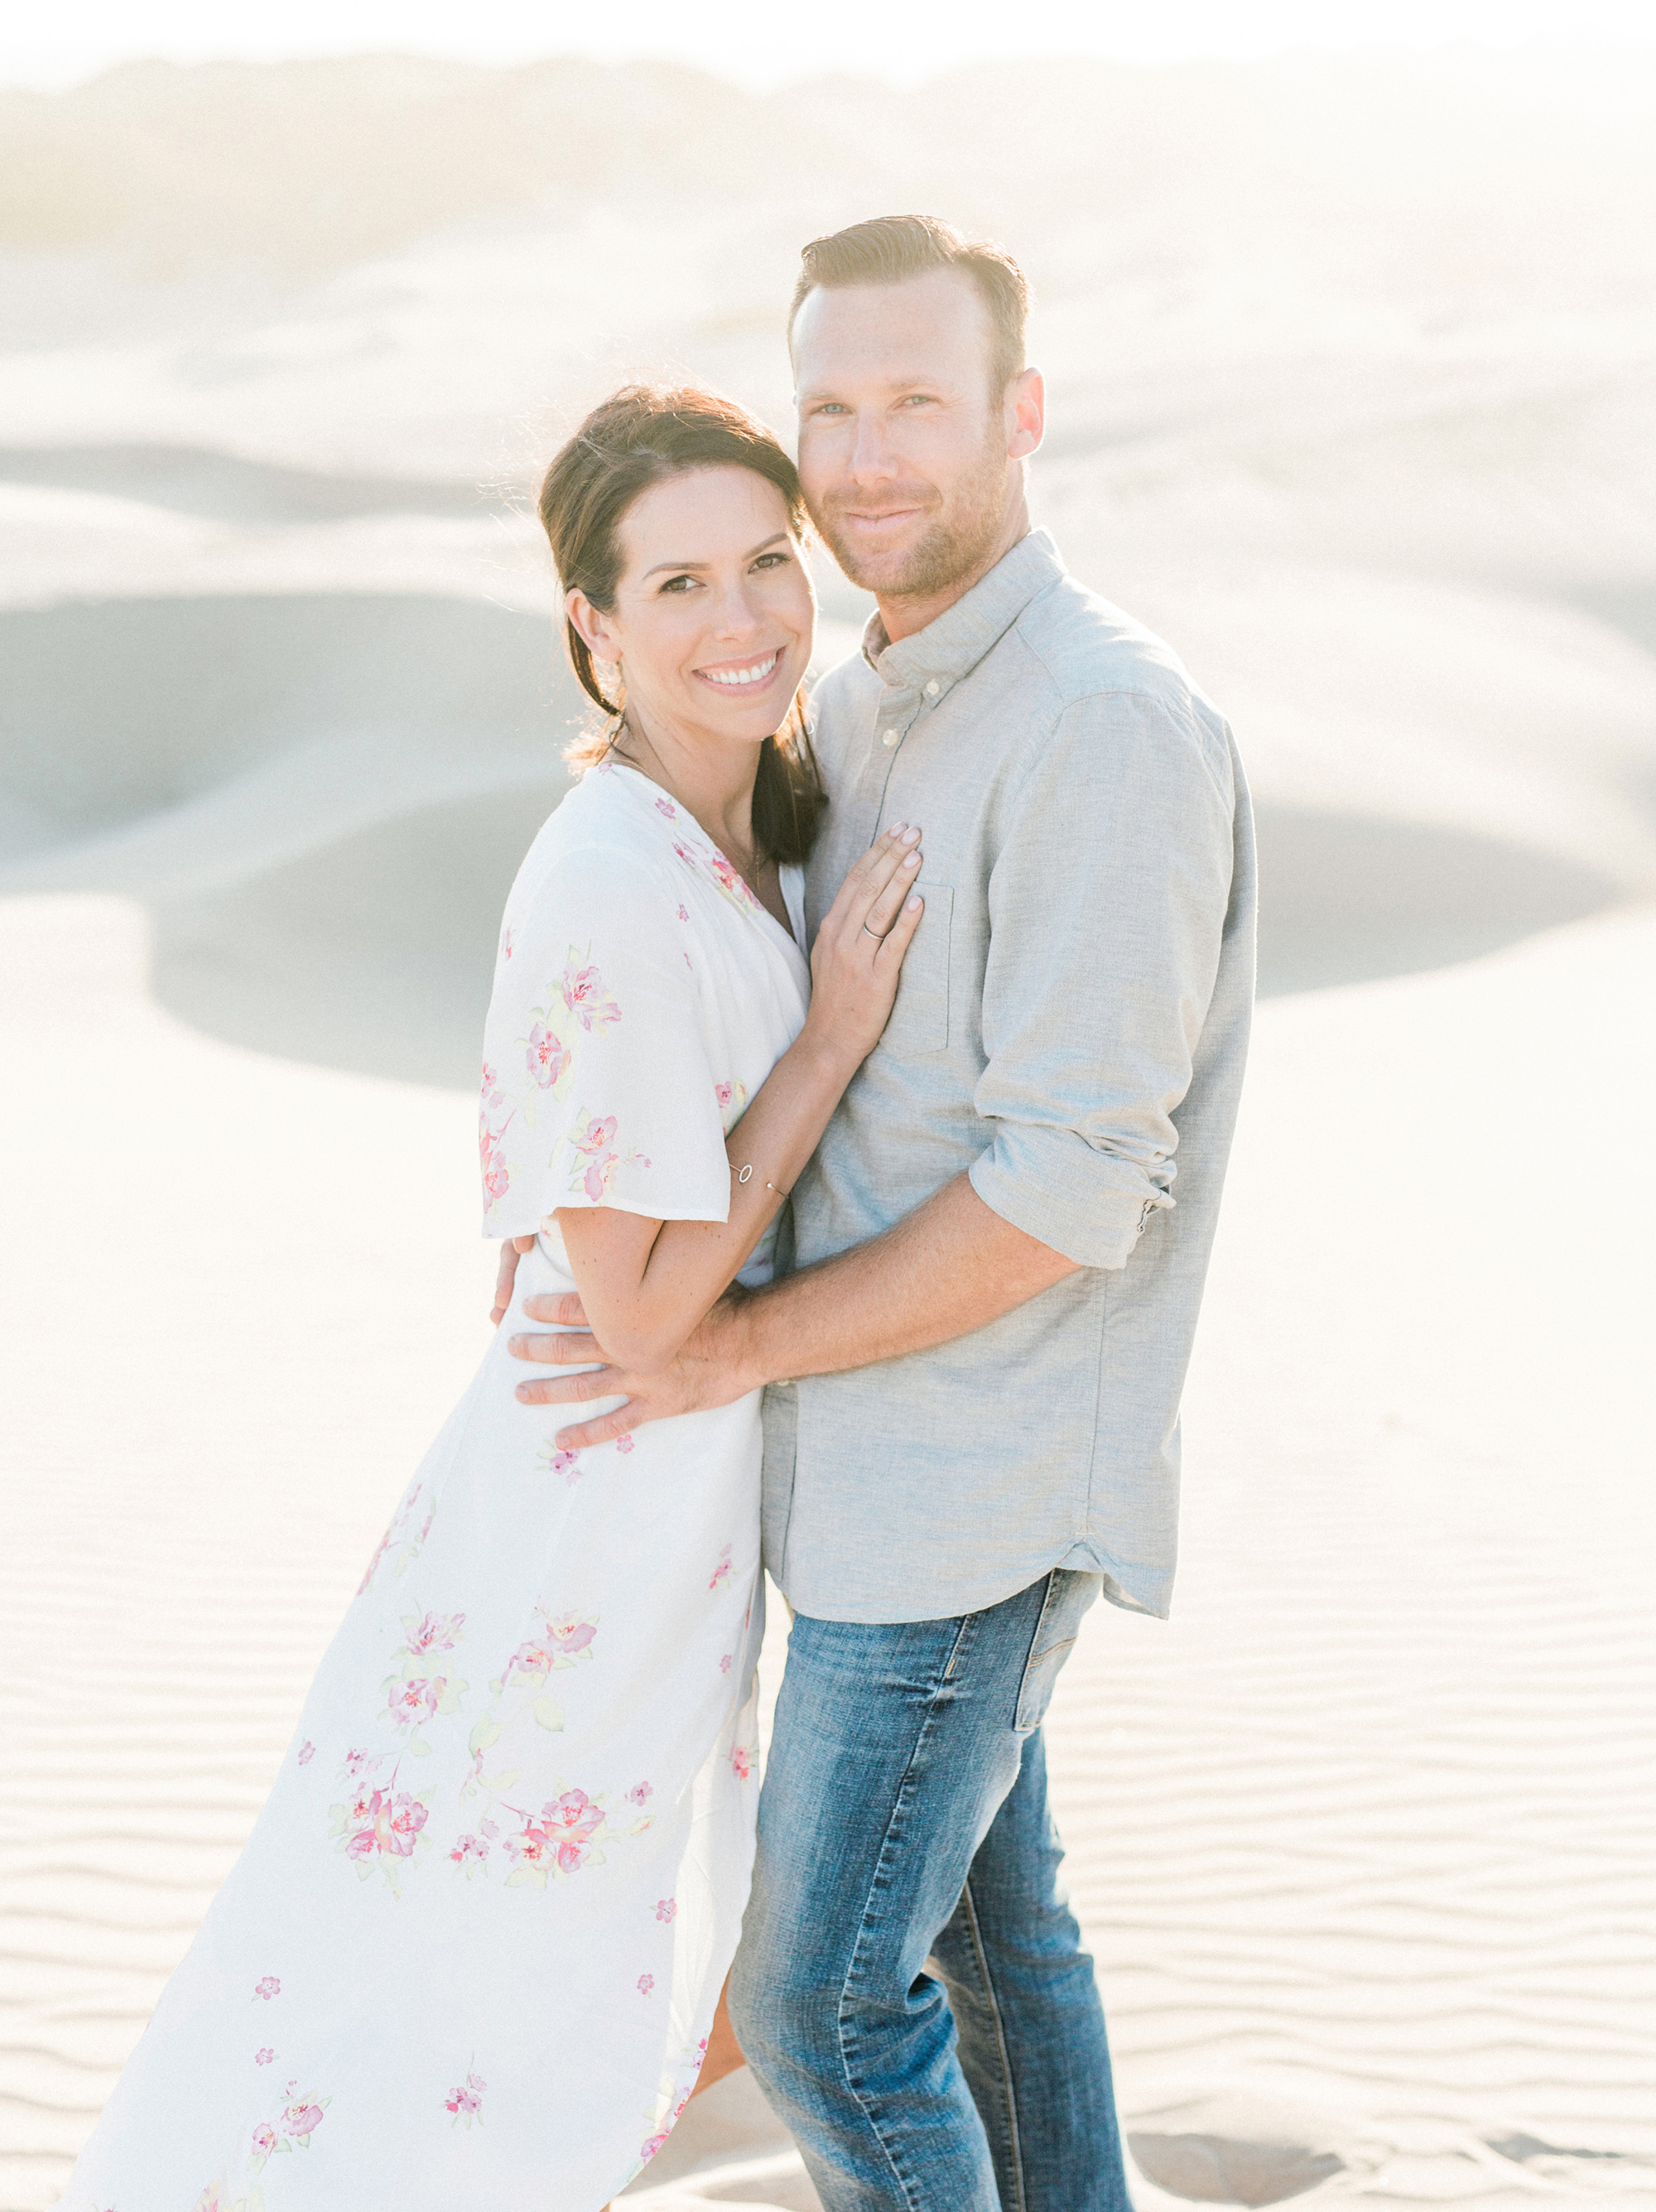 Anniversary session by Dallas photographer Tenth & Grace.